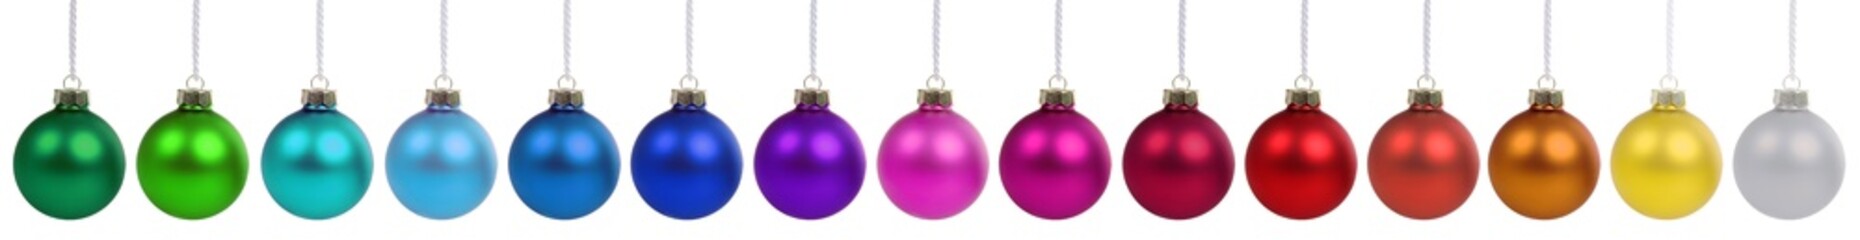 Christmas balls baubles banner ornament colorful decoration in a row isolated on white